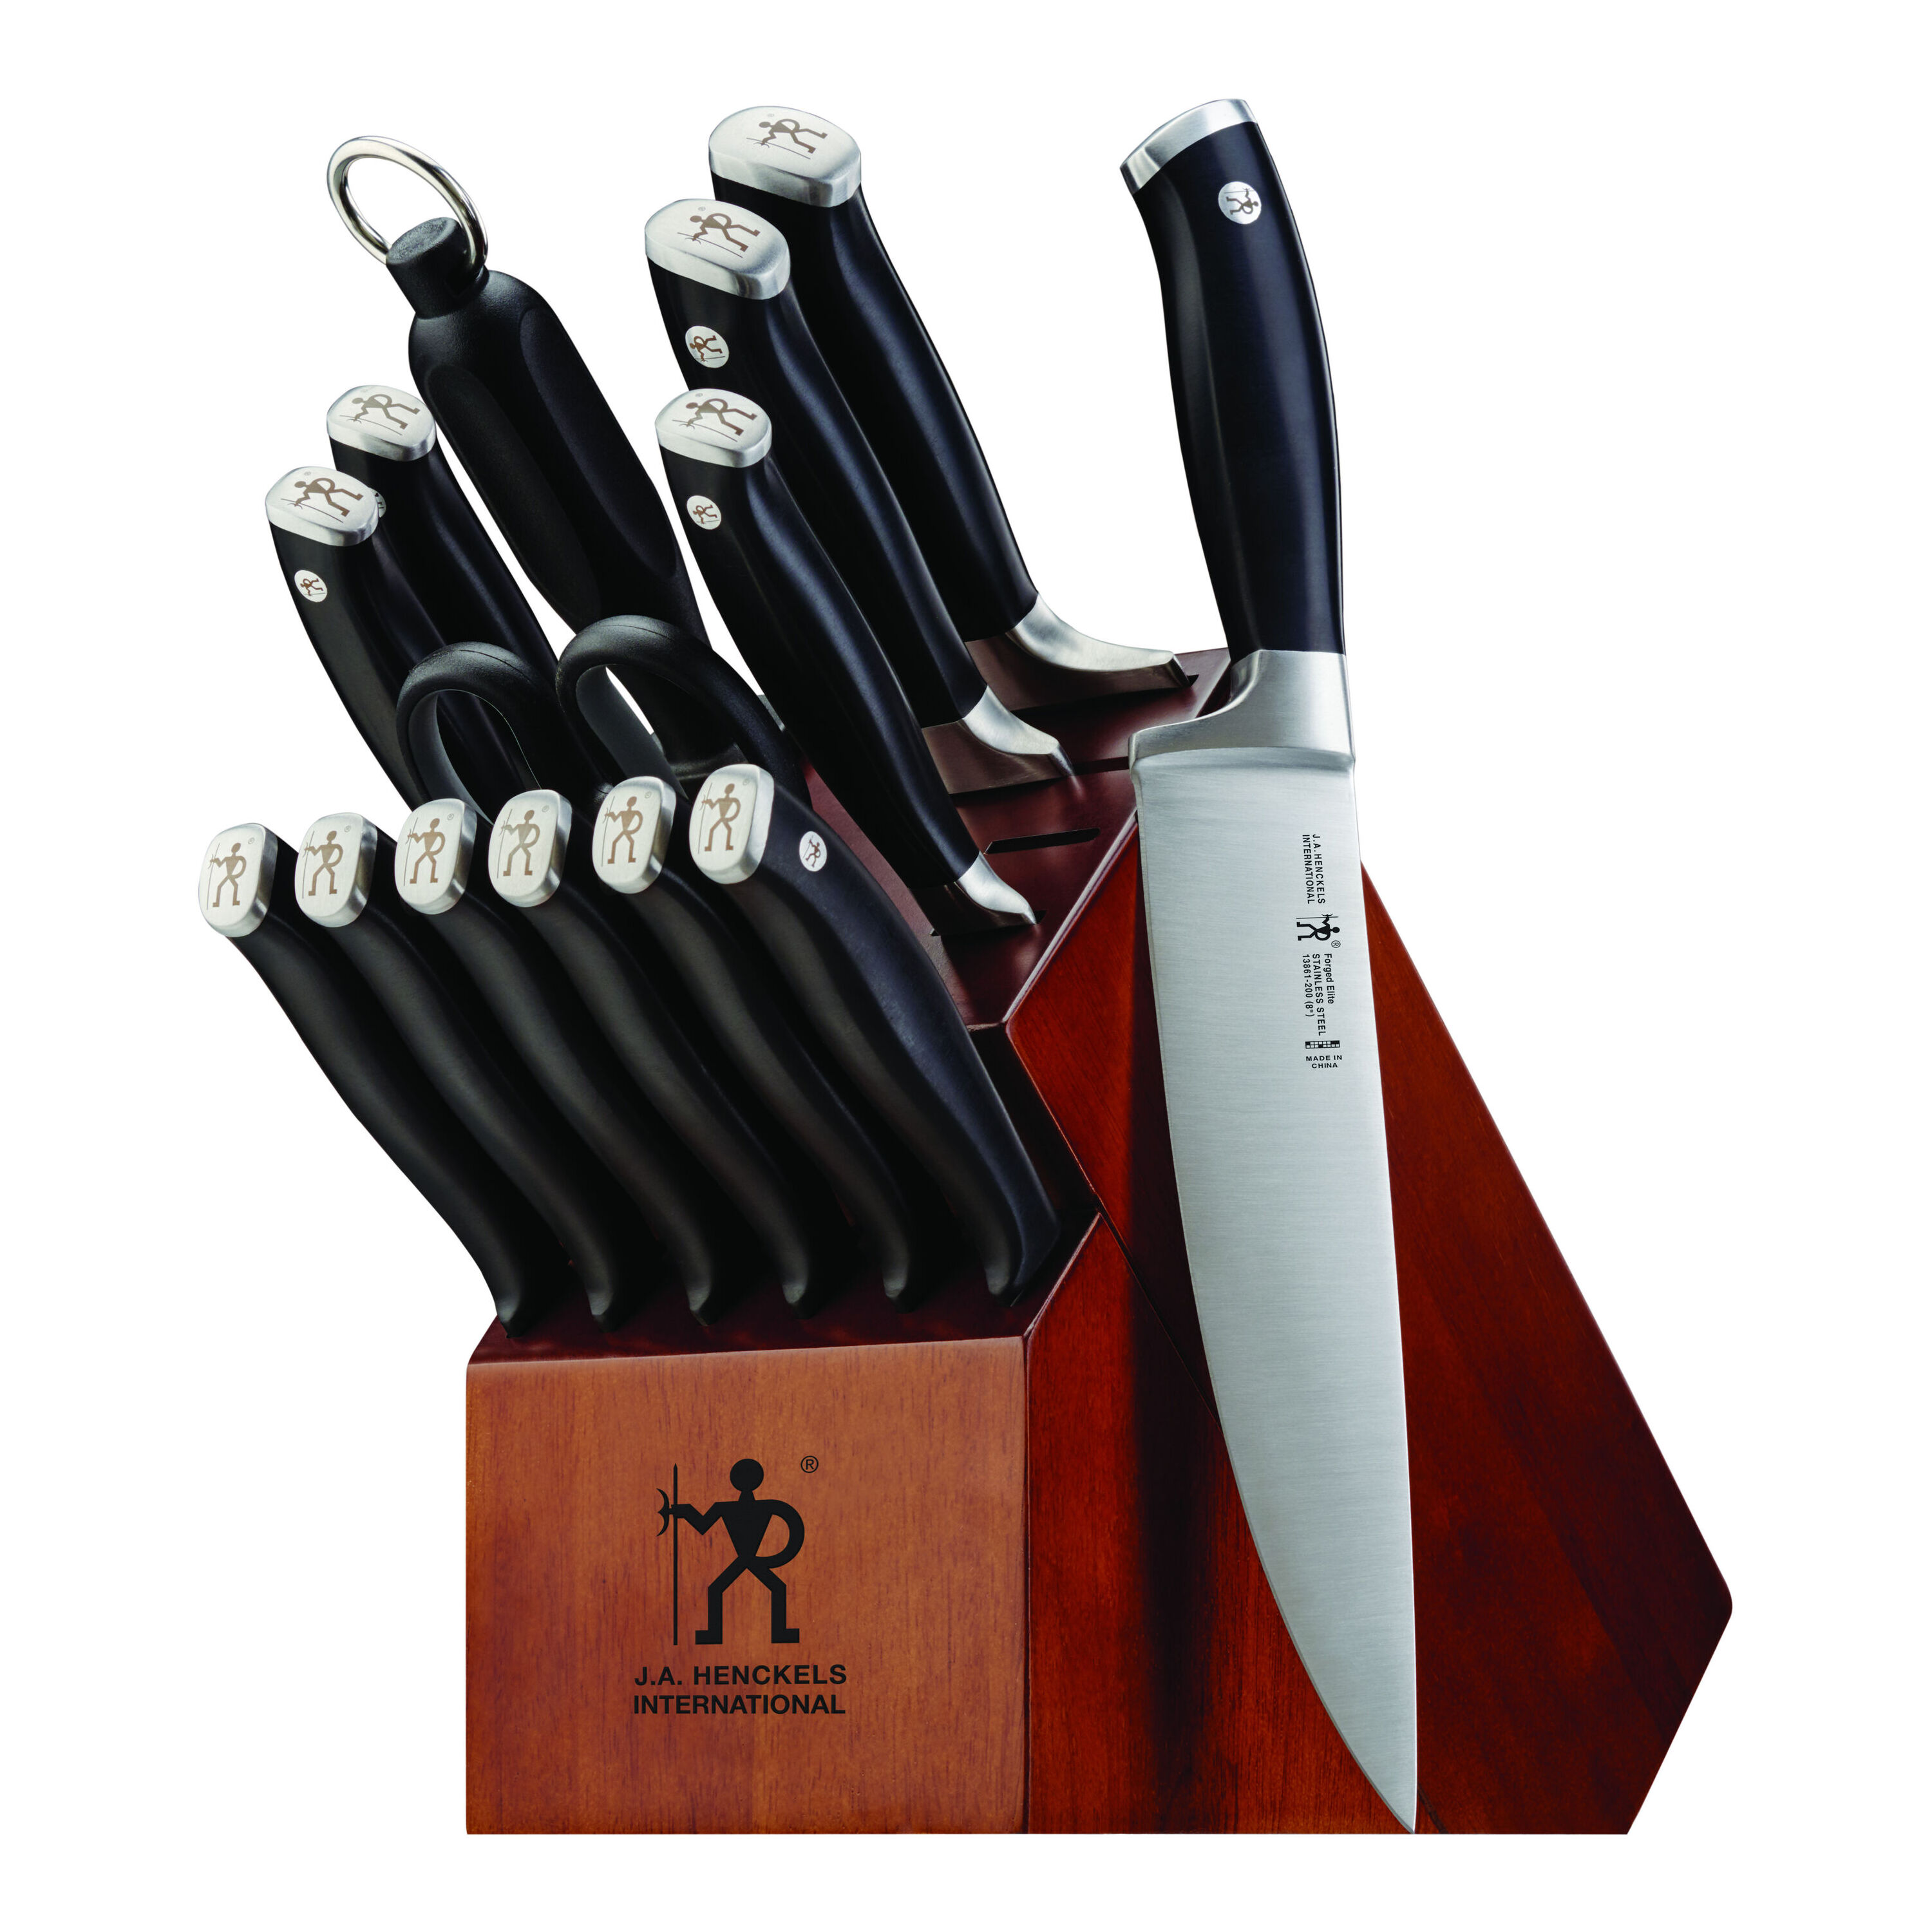 15 Great Steak Knife Sets to Gift and to Get This Season